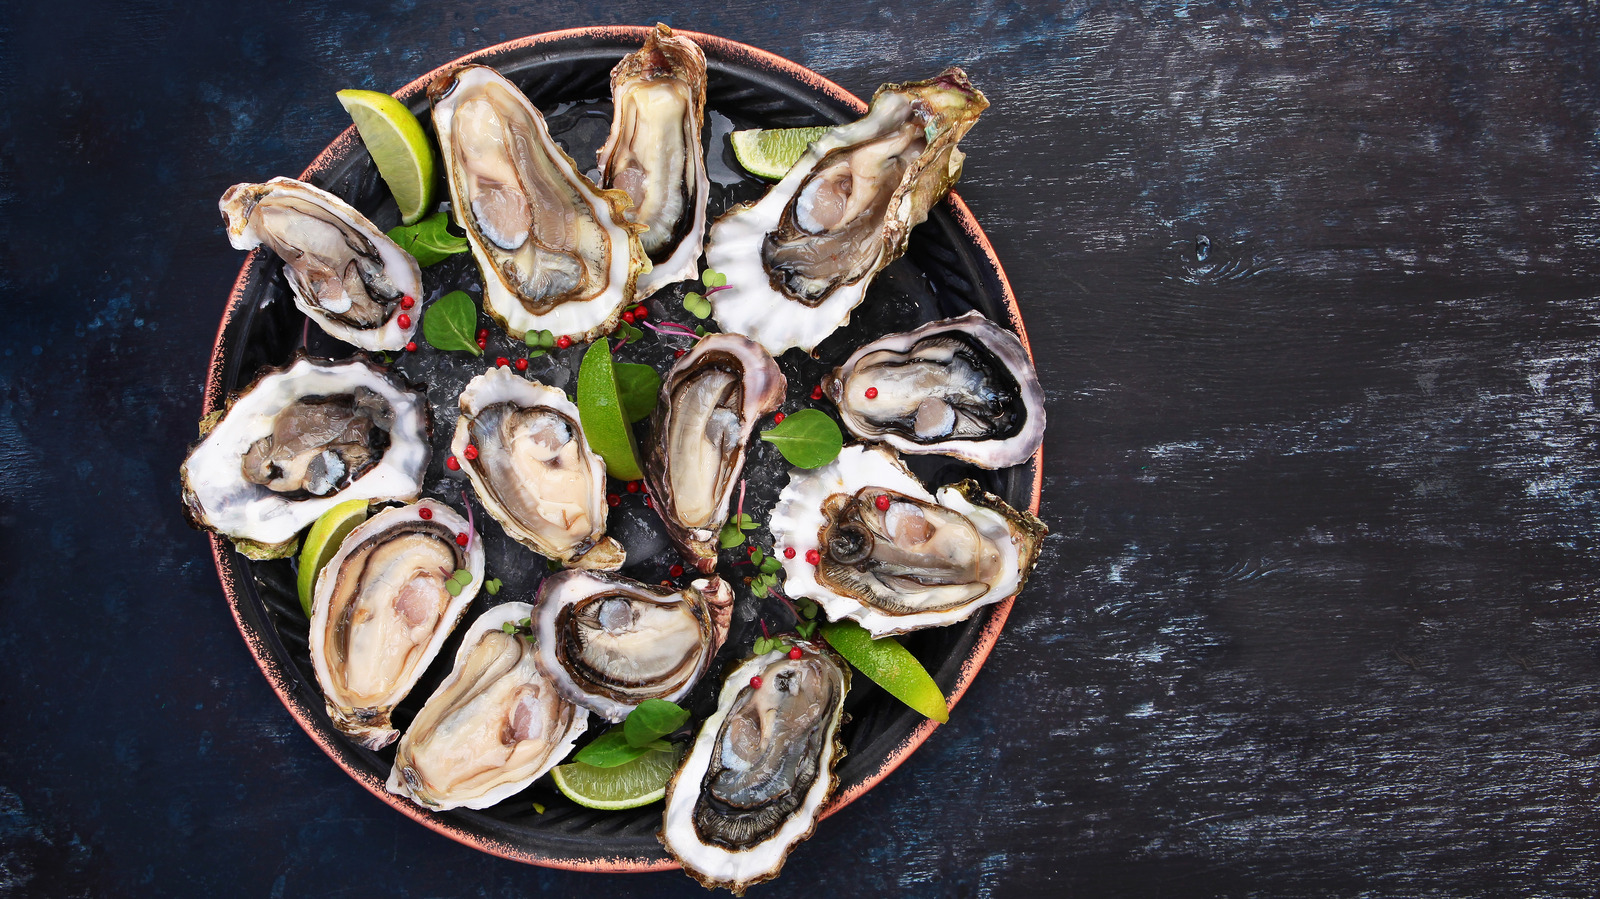 https://www.tastingtable.com/img/gallery/14-types-of-oysters-you-should-know/l-intro-1692162257.jpg